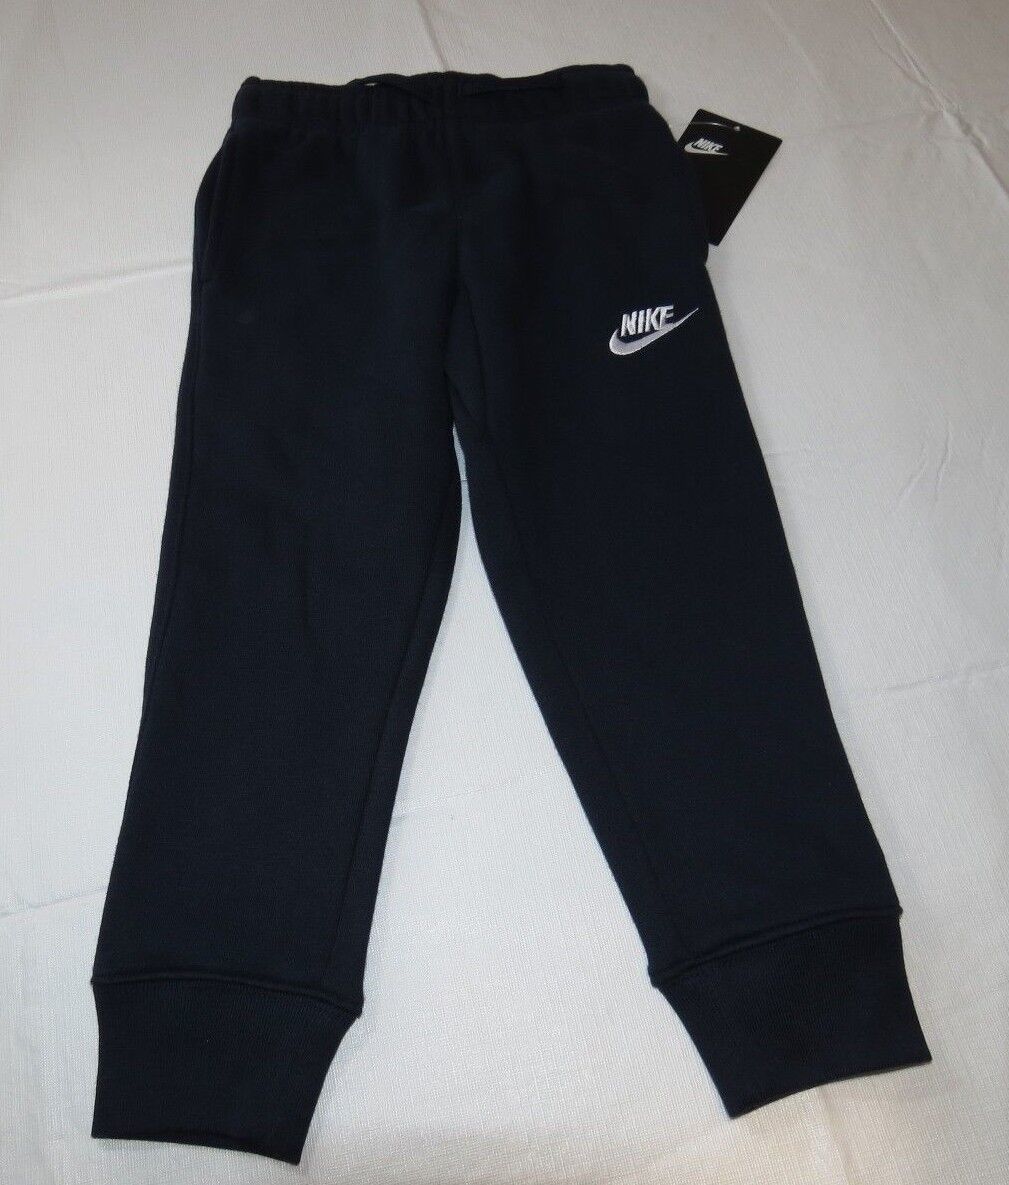 Primary image for Boy's Nike fleece sweat pants 4 XS Youth active 8MB252 695 Obsidian navy Swoosh